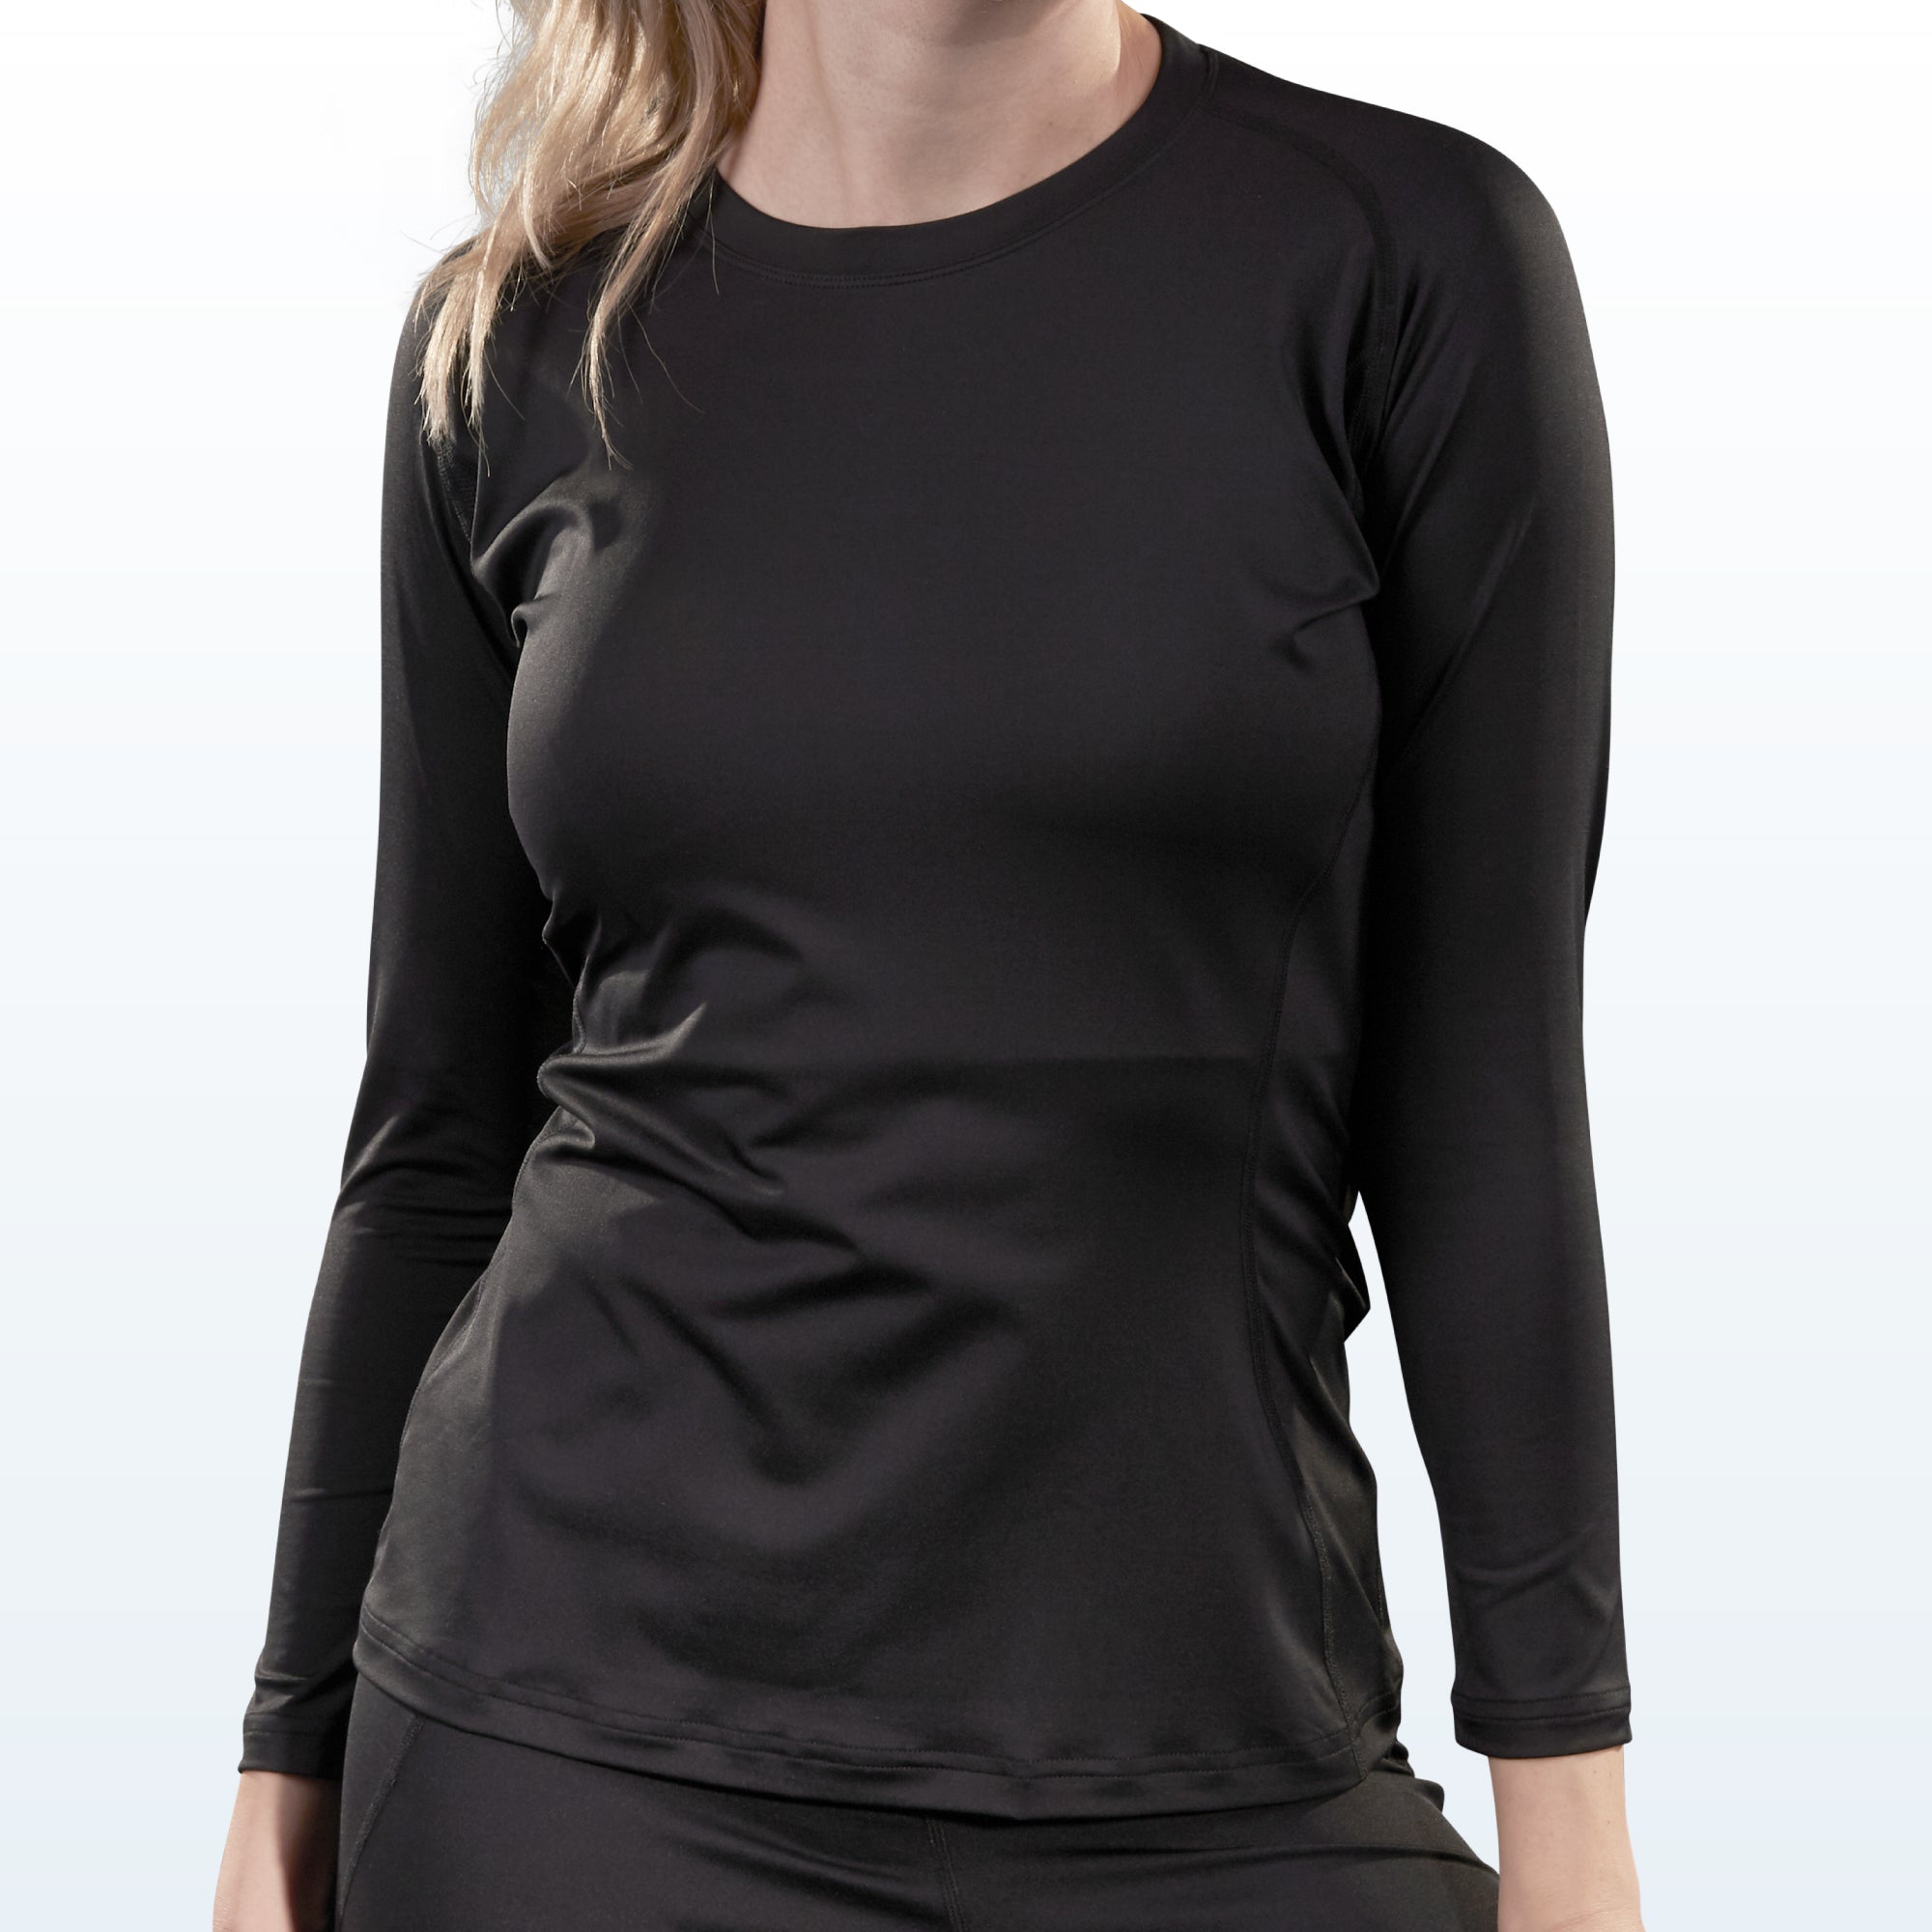 Women Compression Recovery Long Sleeve Shirt - Vital Salveo